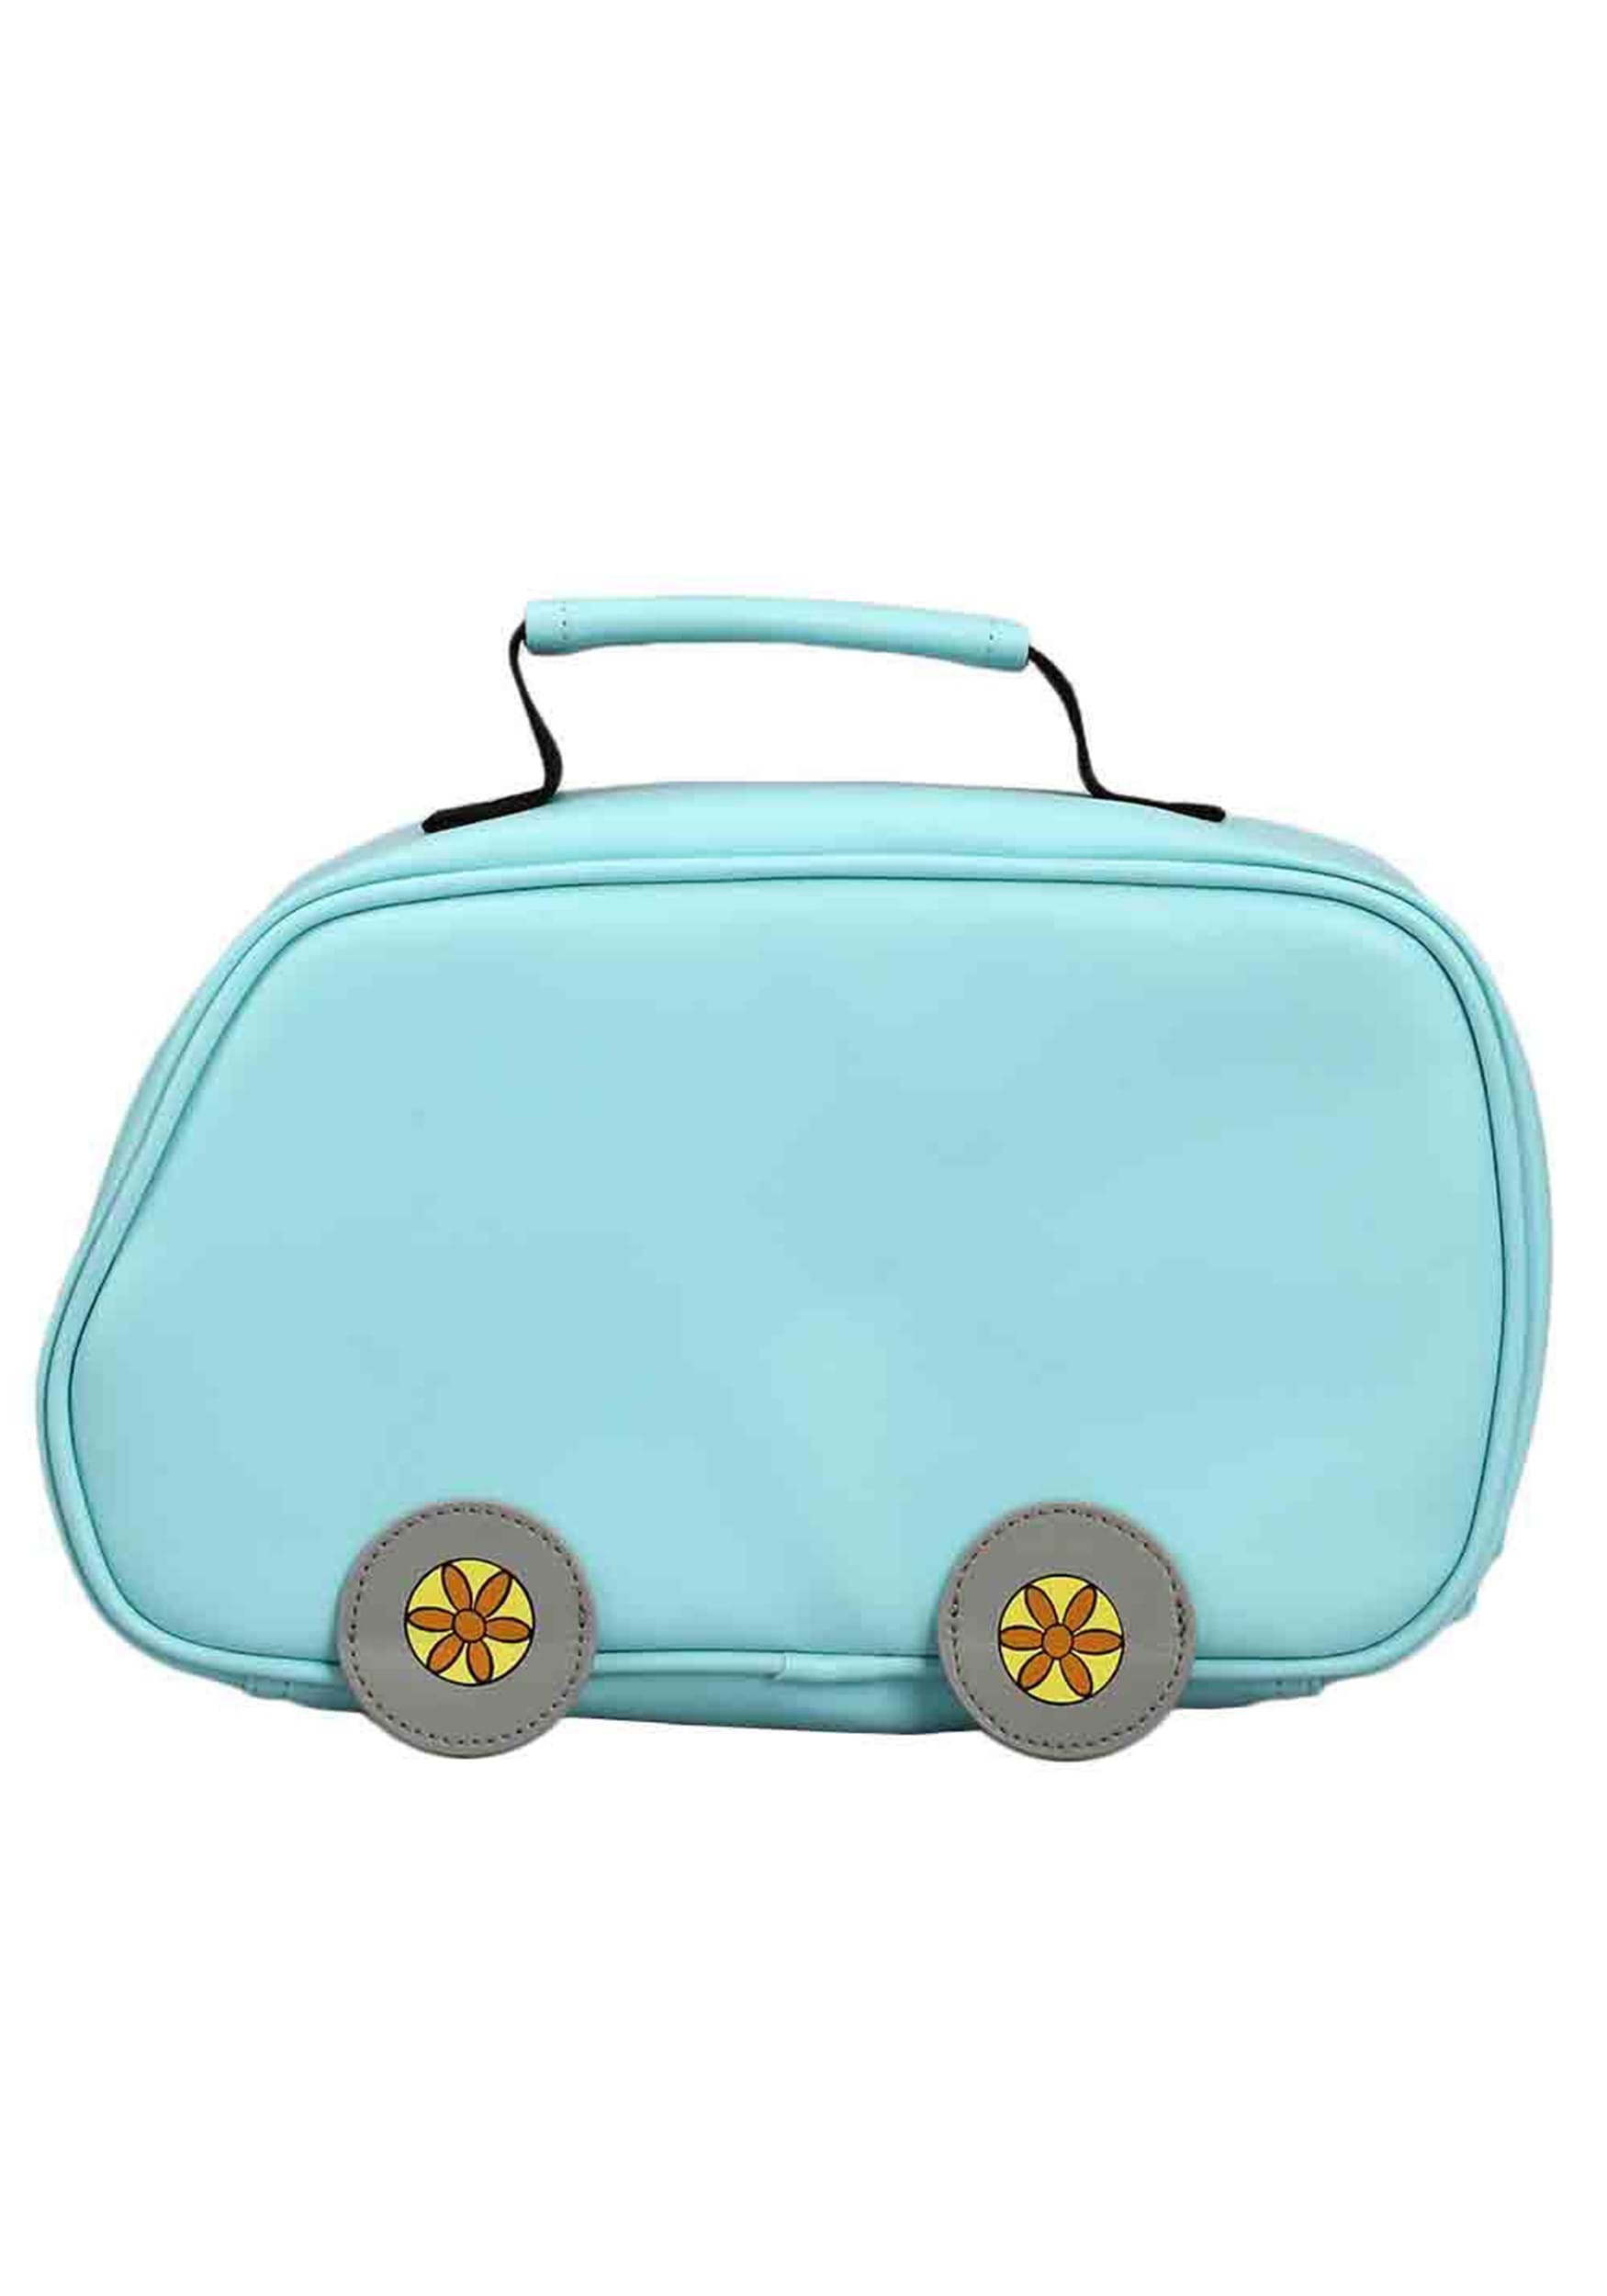 Scooby-Doo Die Cut Insulated Lunchbox of Mystery Machine